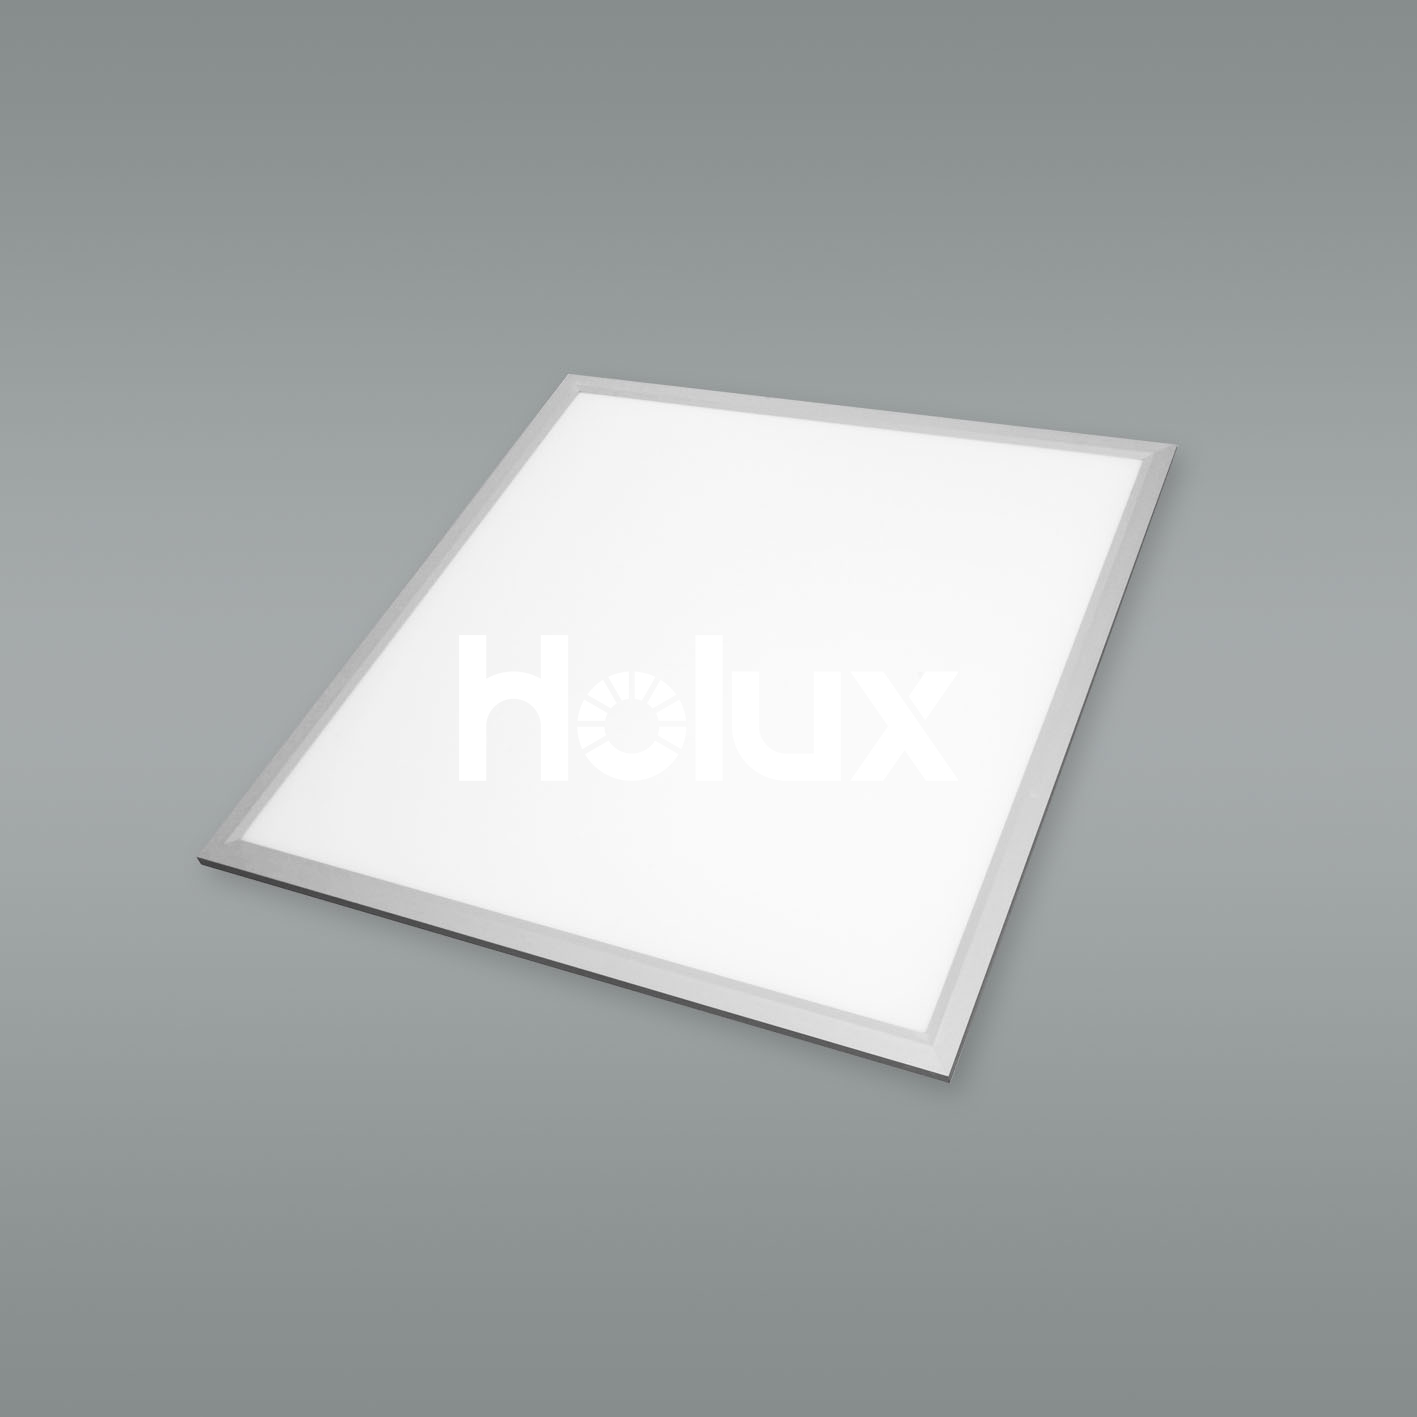 hyde dimmable led panel light 24x24